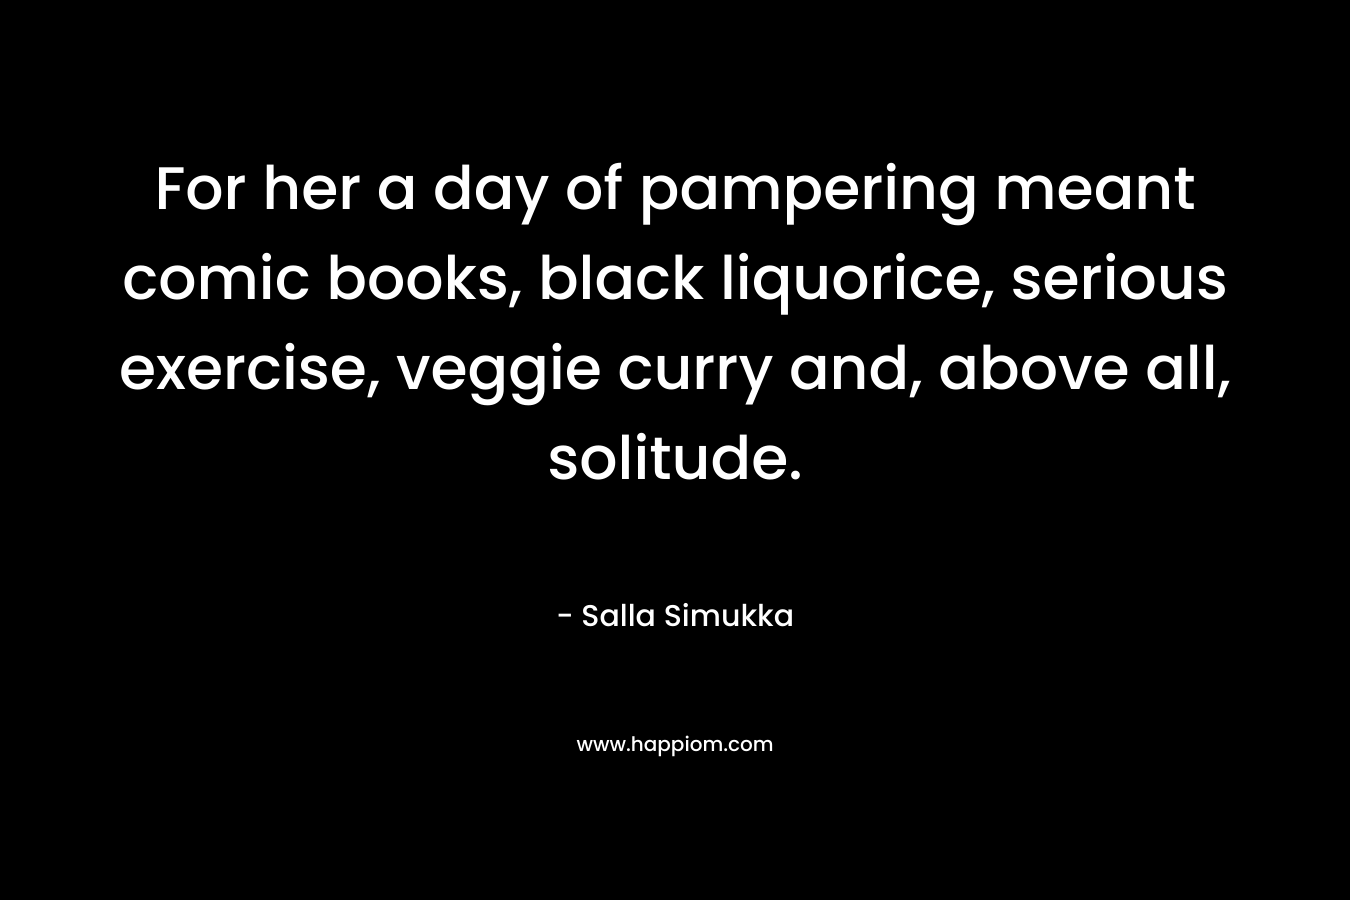 For her a day of pampering meant comic books, black liquorice, serious exercise, veggie curry and, above all, solitude.